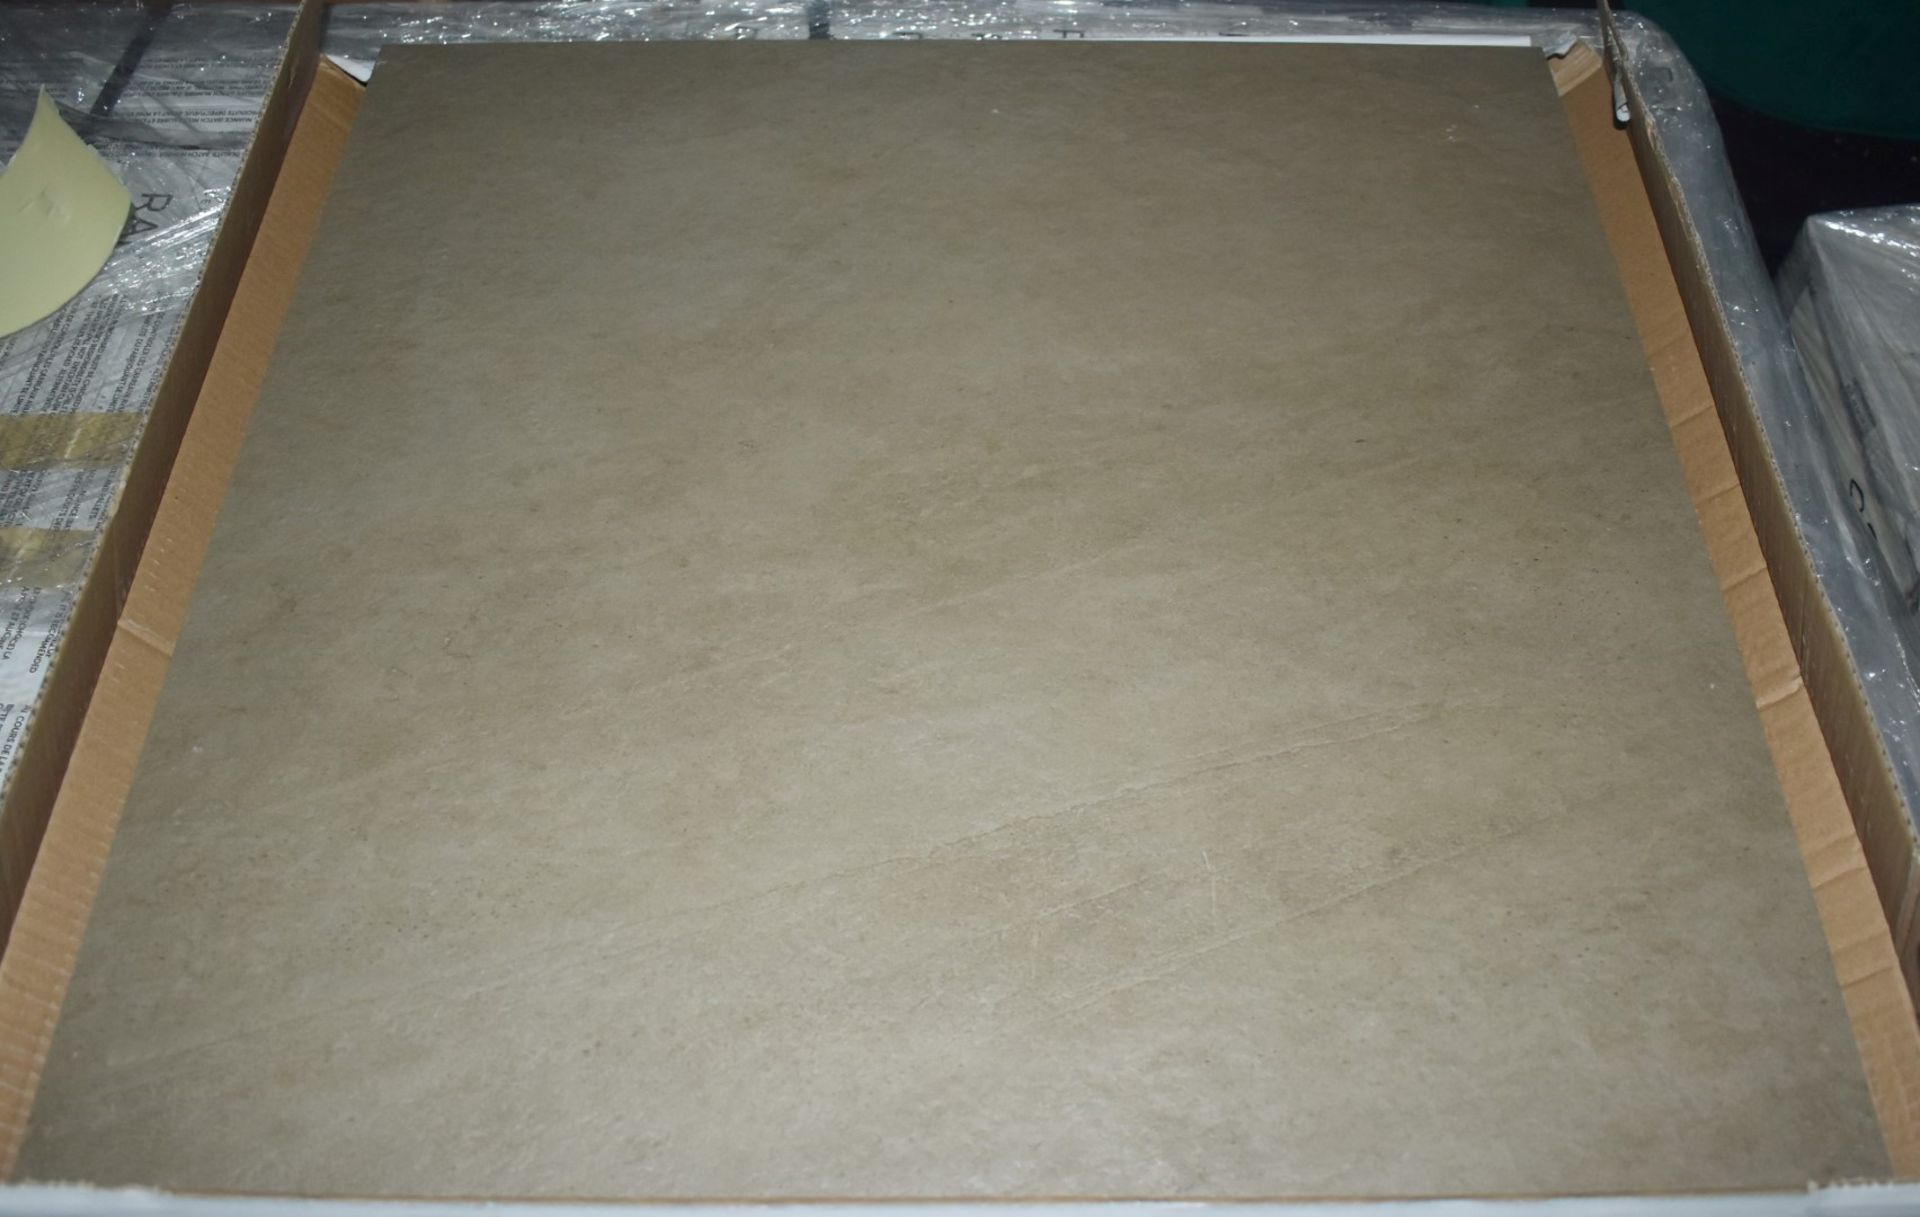 12 x Boxes of RAK Porcelain Floor or Wall Tiles - Concrete Design in Clay Brown - 60 x 60 cm - Image 7 of 7